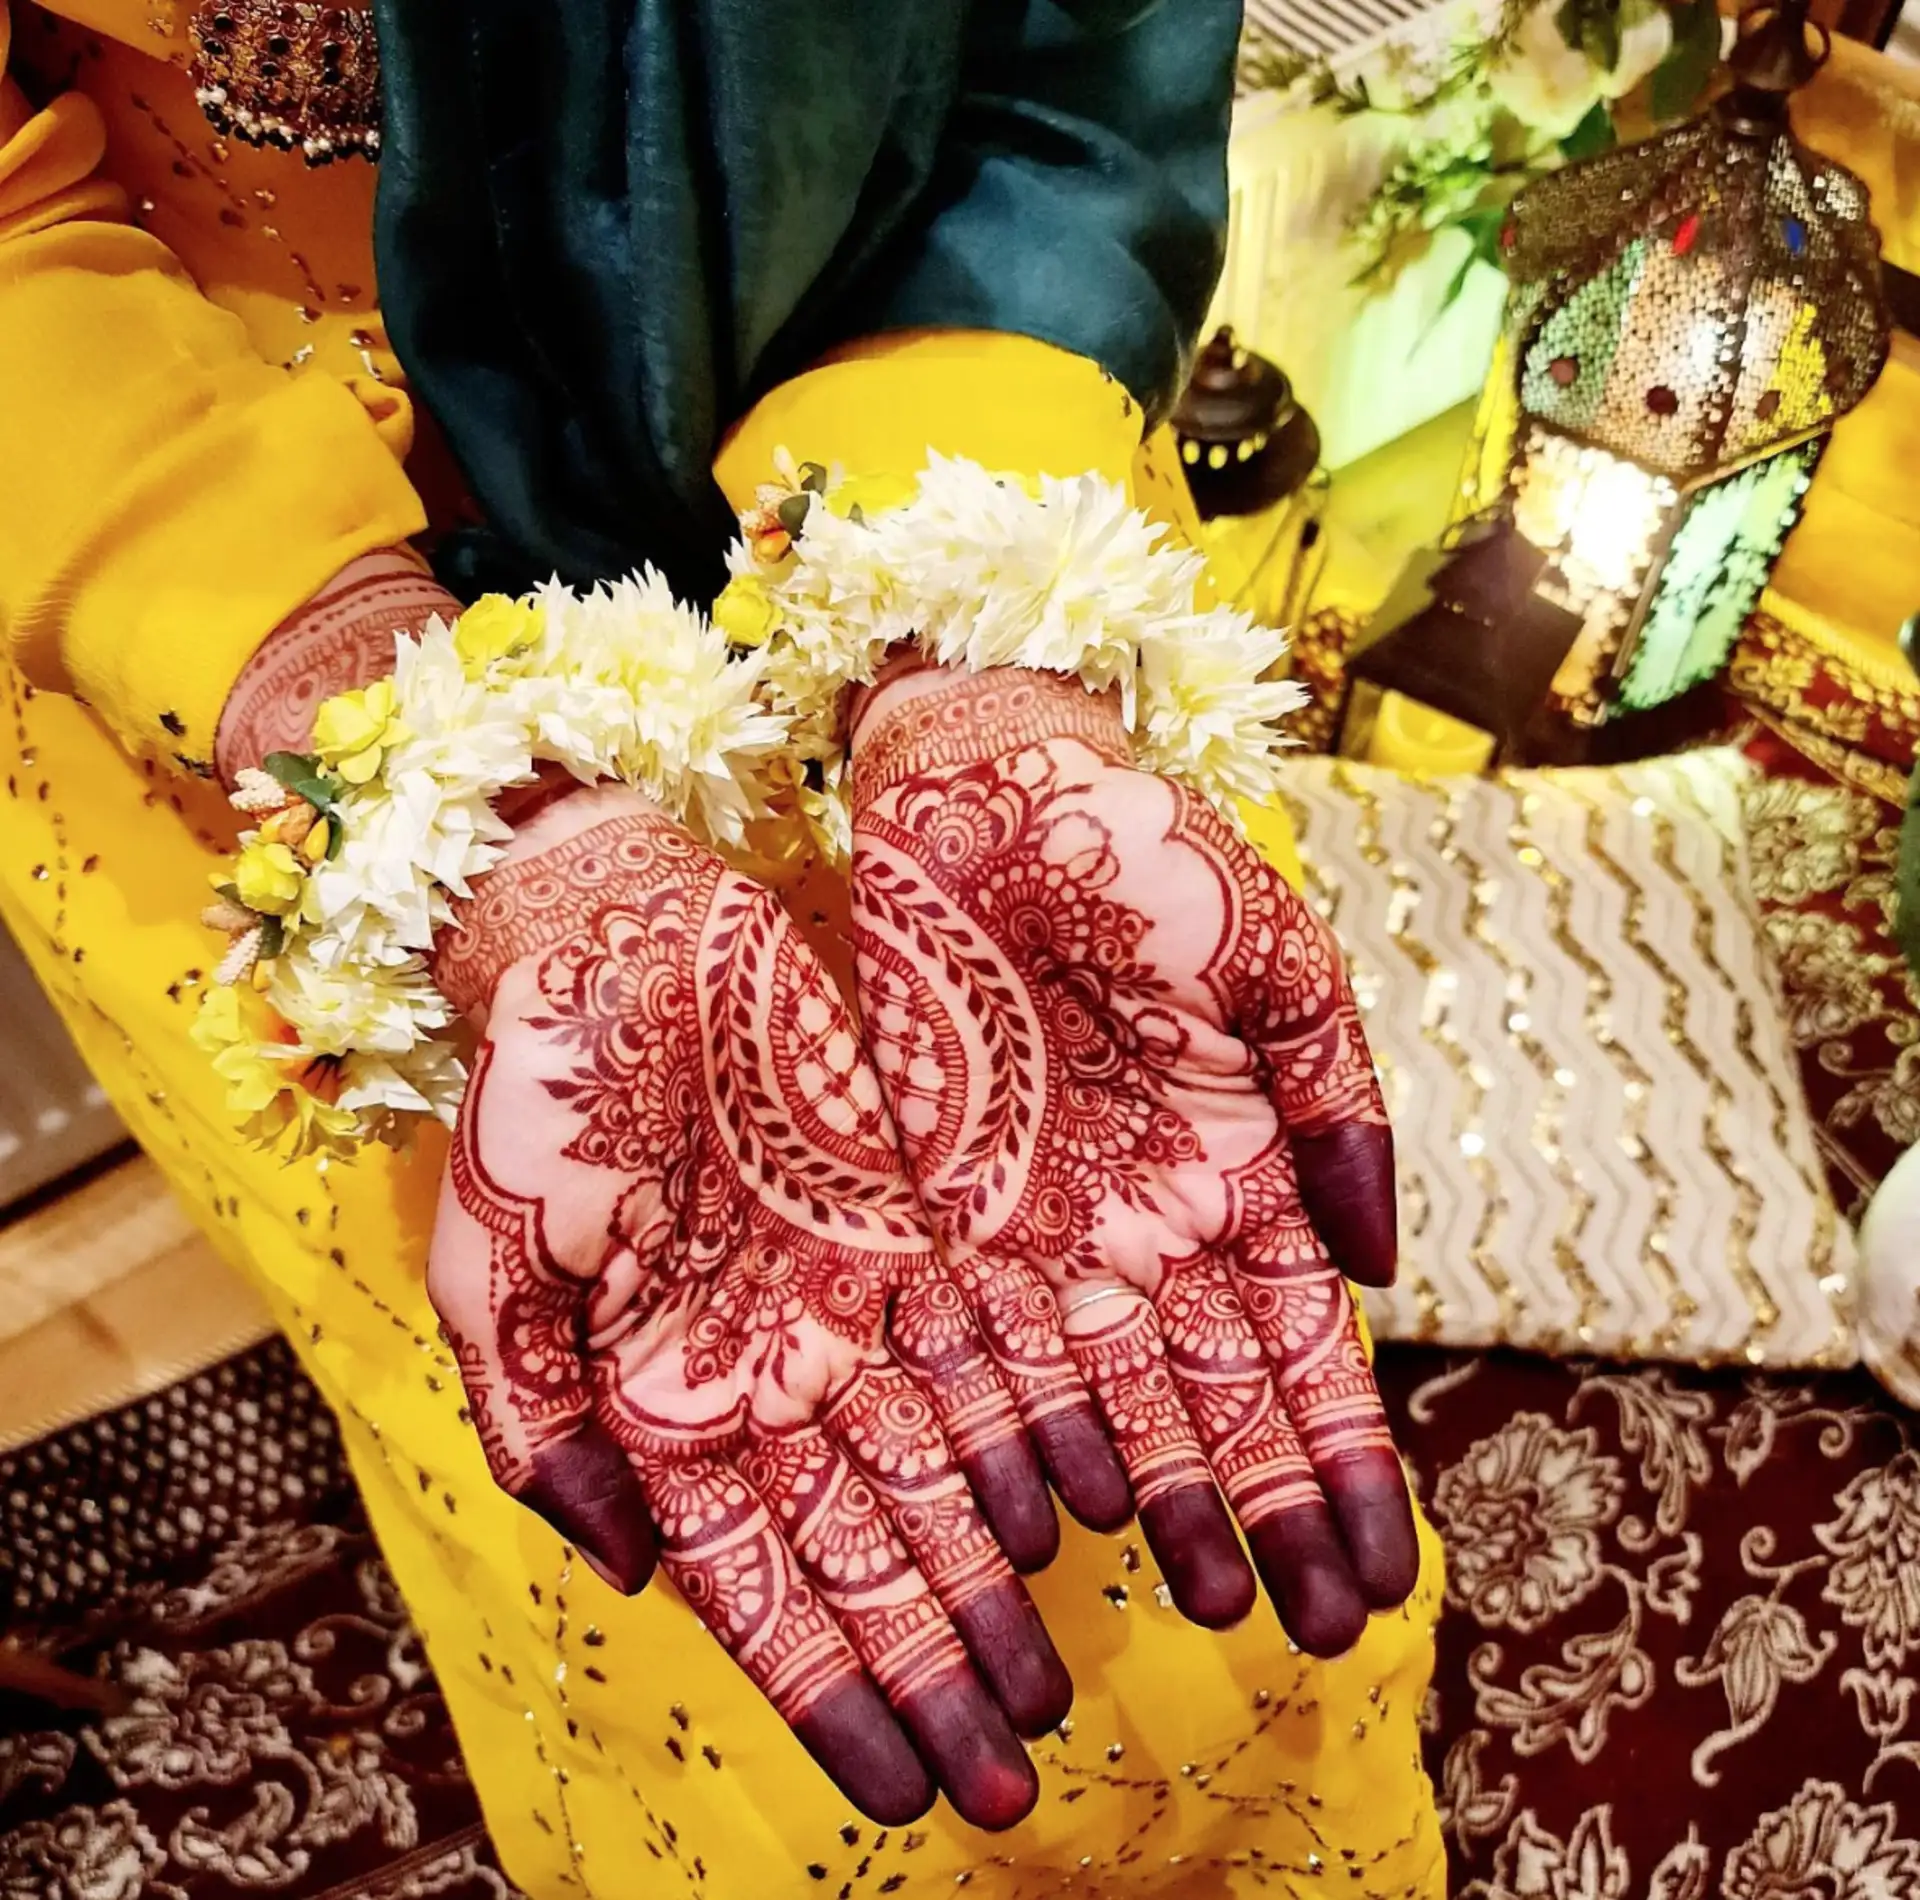 How much do Mehndi artists charge? - Quora